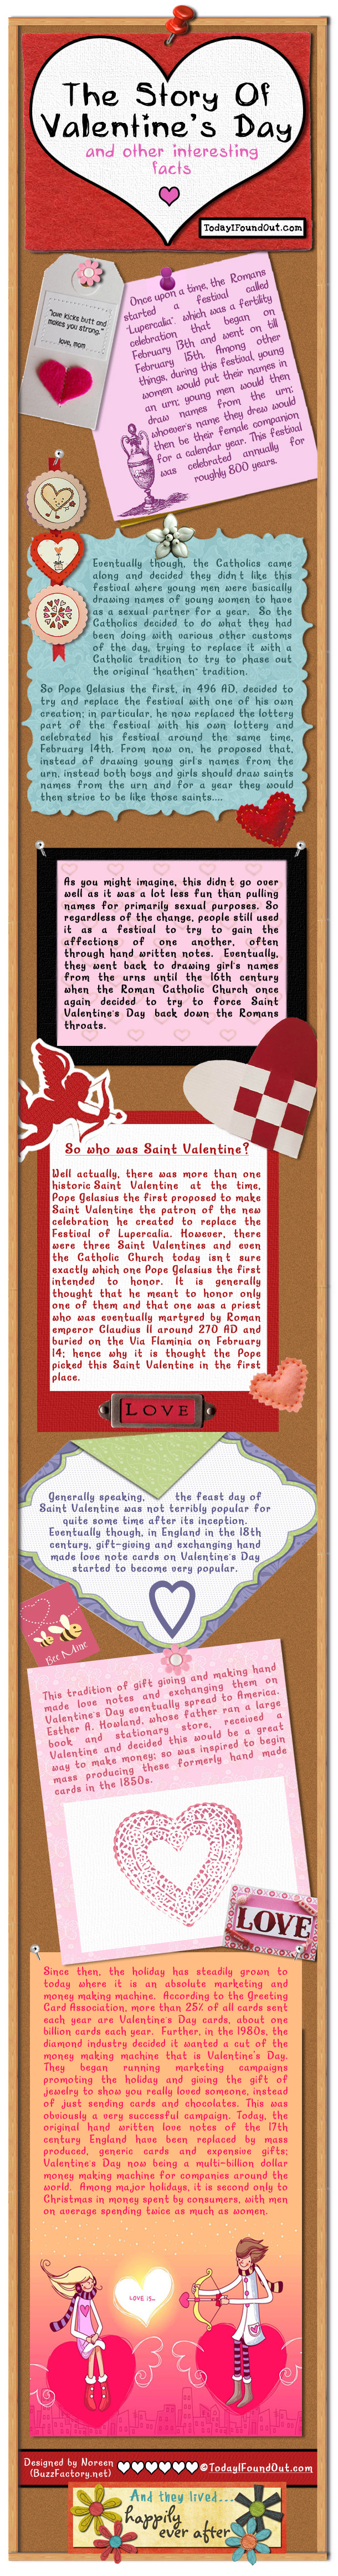 History Of Valentine's Day Infographic